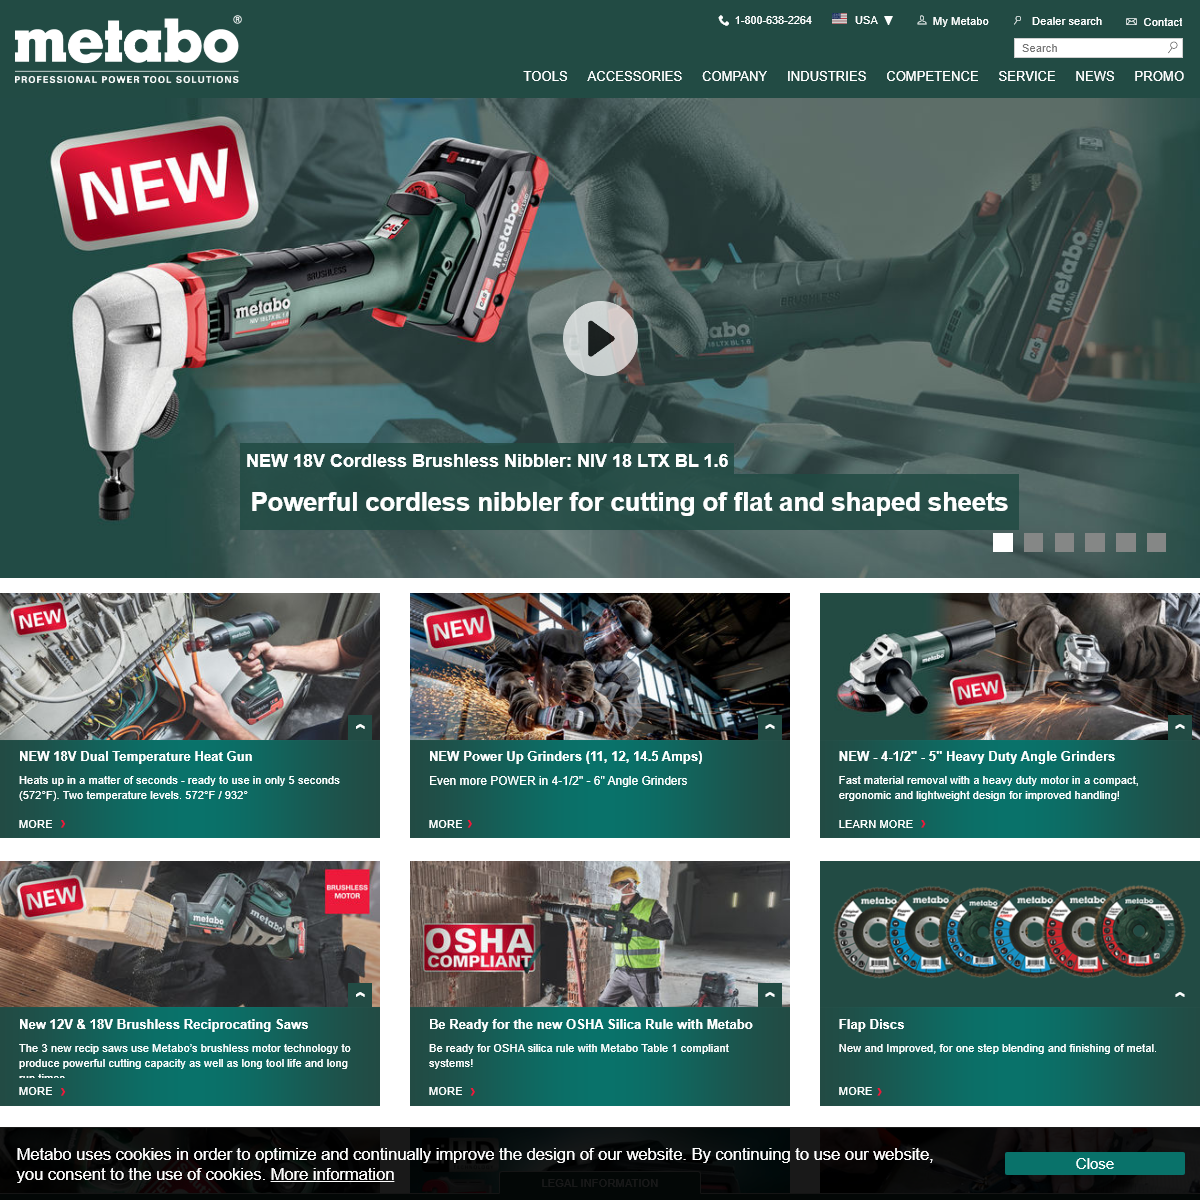 A complete backup of metabo.com